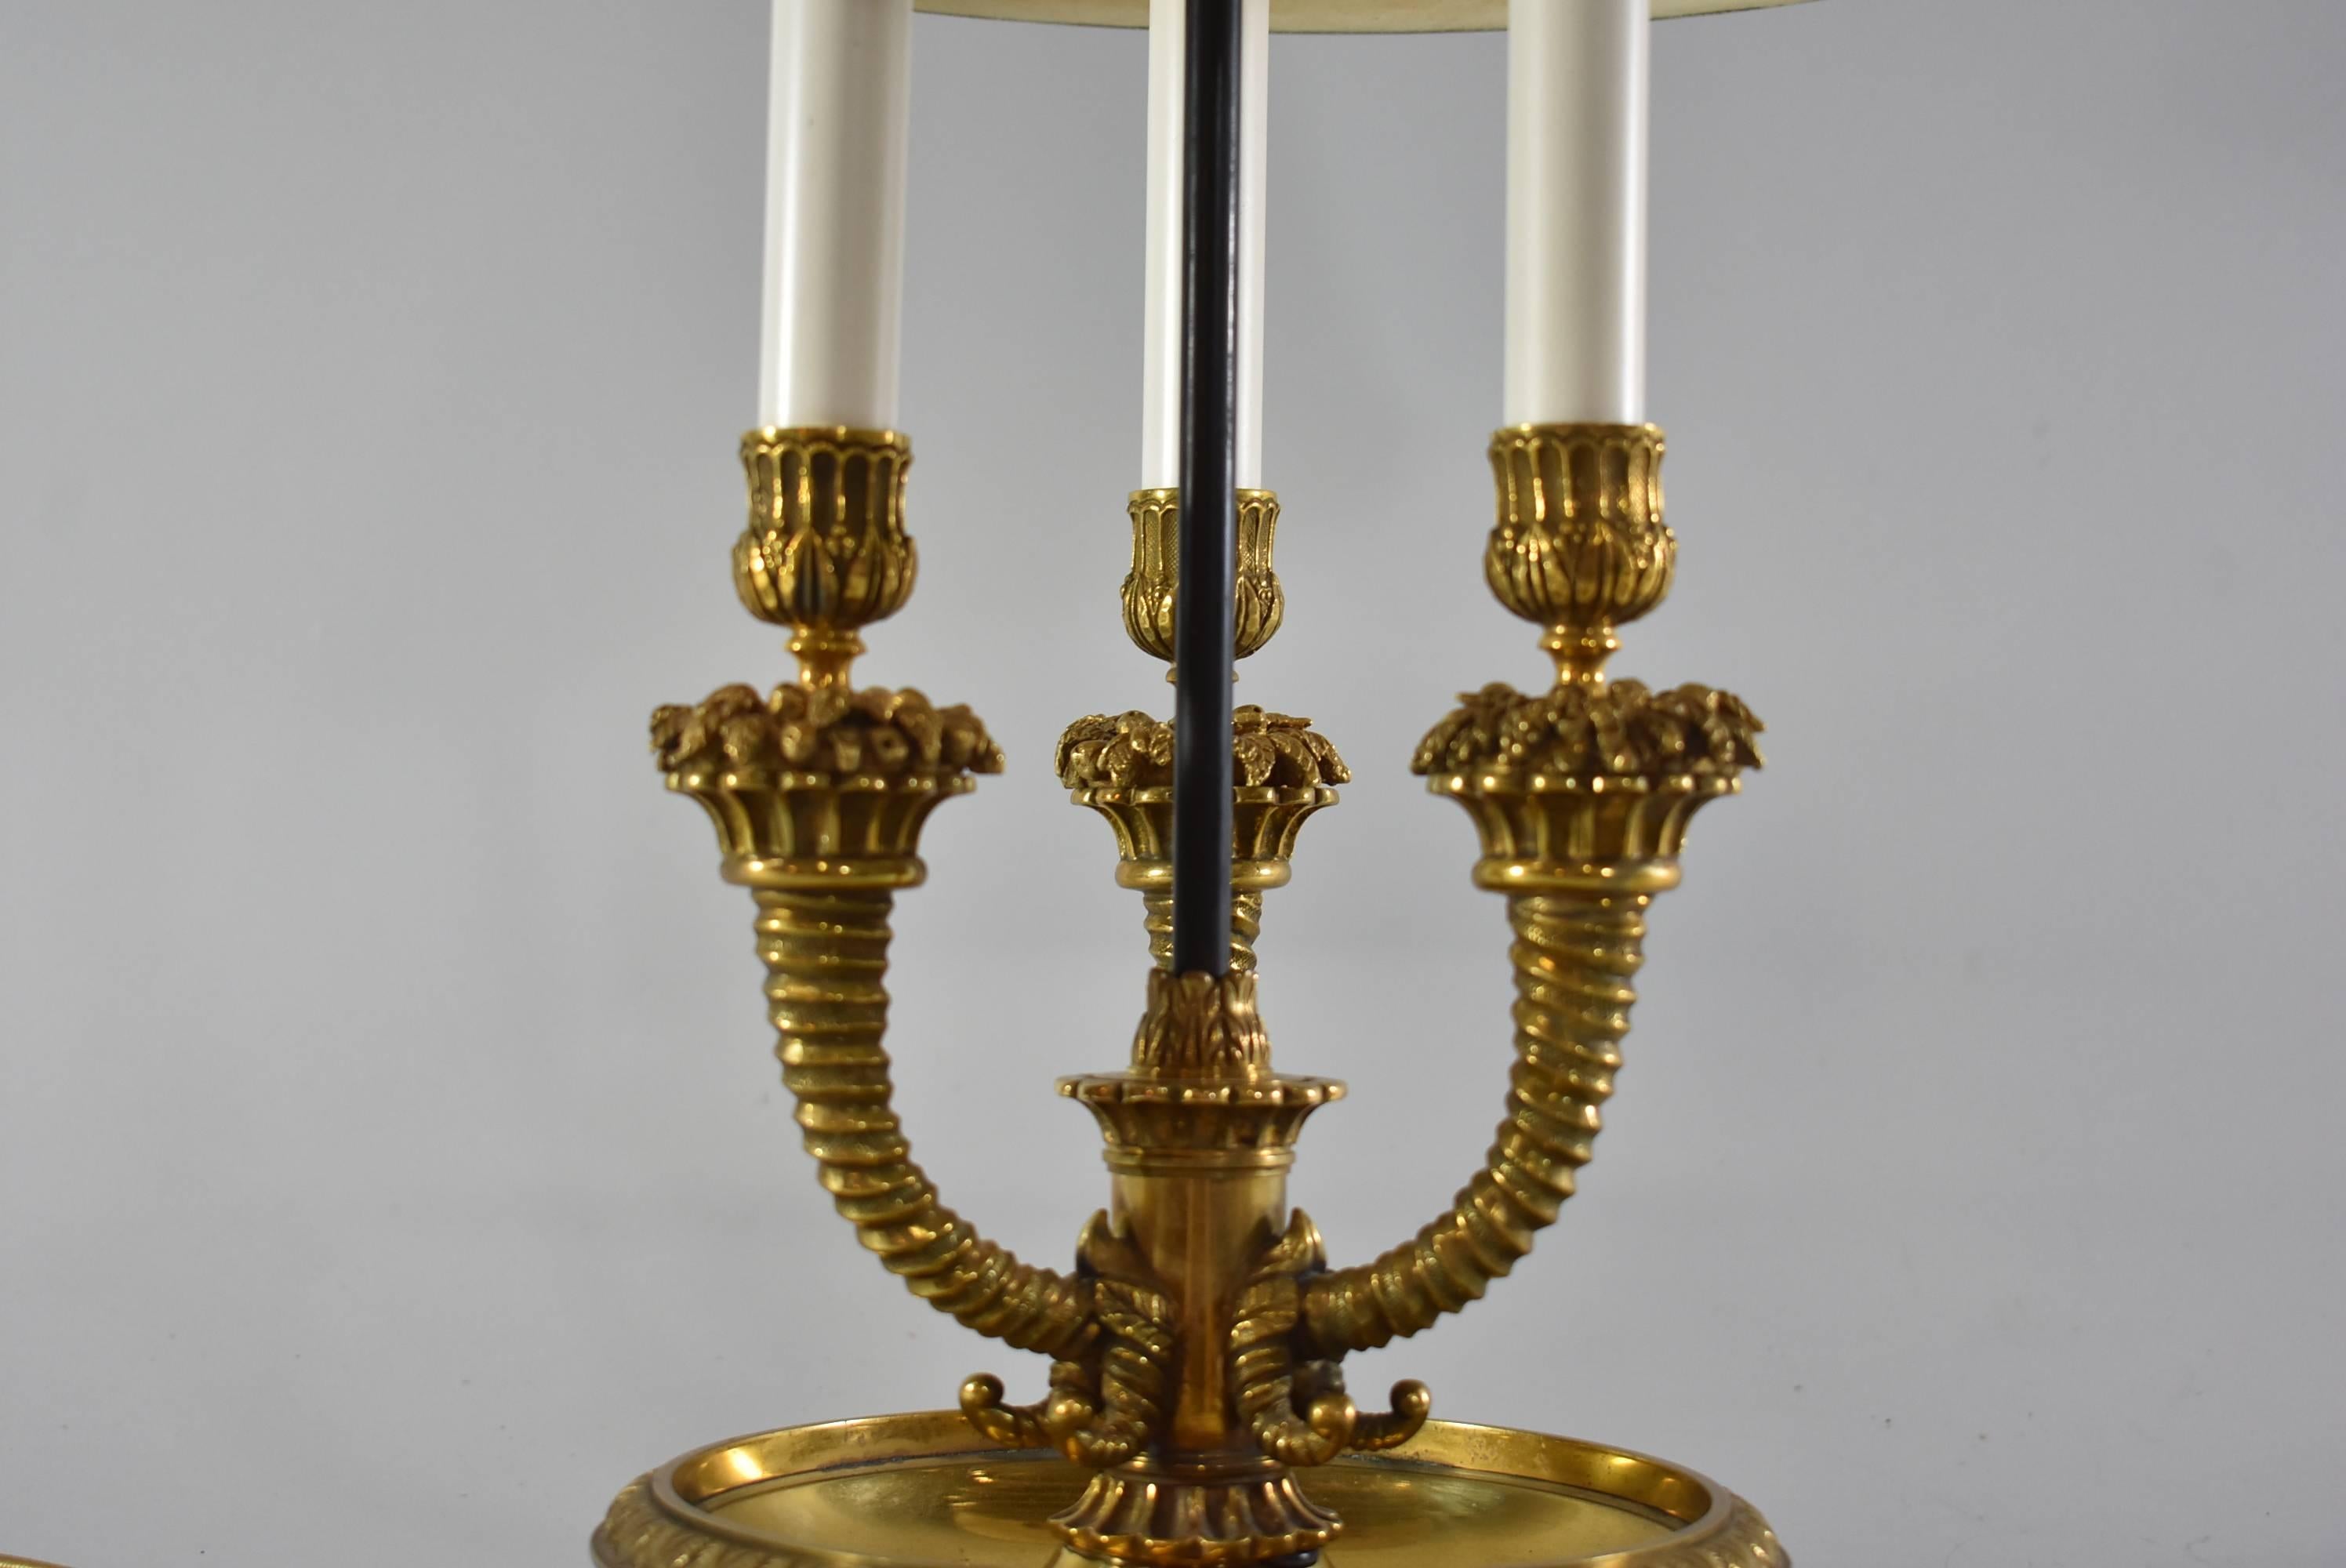 20th Century Brass Bouillote Desk Lamp with Black and Gold Tole Shade and Three Sockets